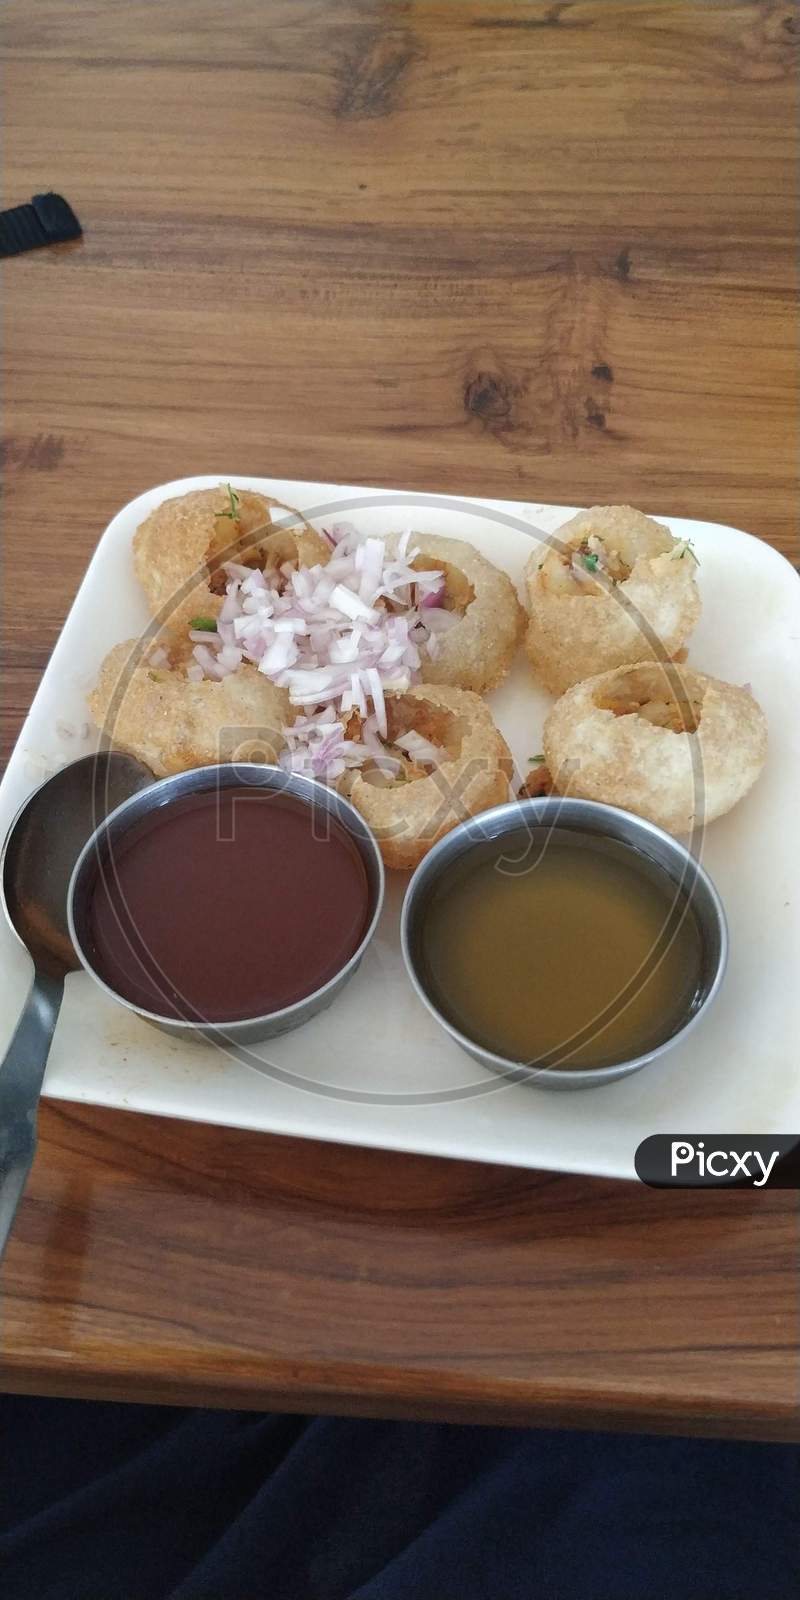 Famous Indian Street Food Called Pani Puri Or Golgappe With Sweet And Spicy Chutney With Onion And Aloo Or Potato Masala On White Plate